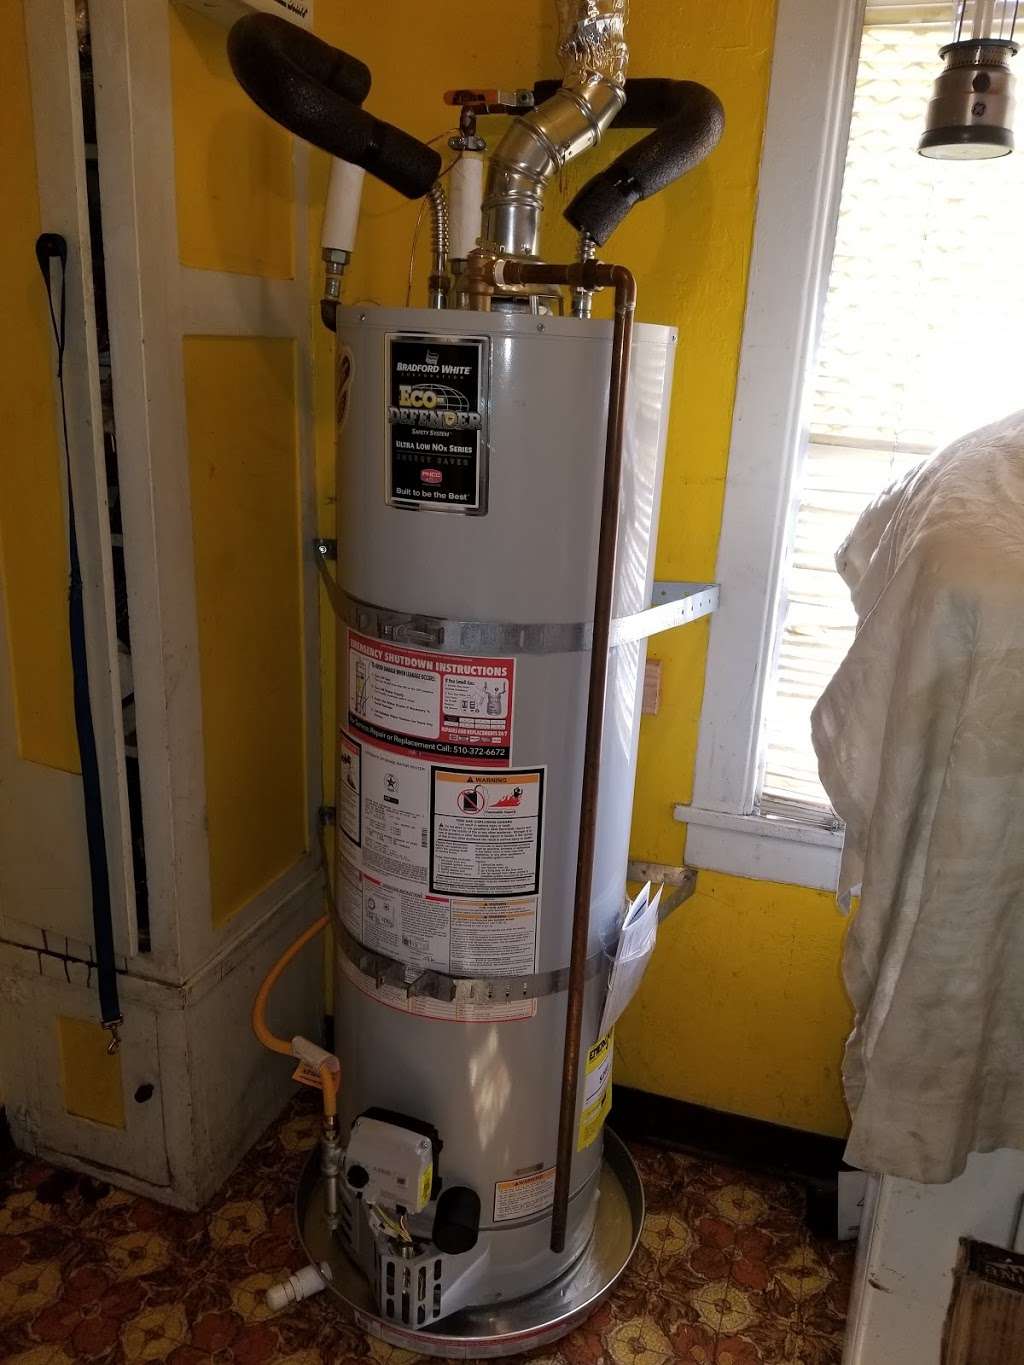 Reliable Water Heaters | 4928 Stirrup Way, Antioch, CA 94531, USA | Phone: (925) 812-4601